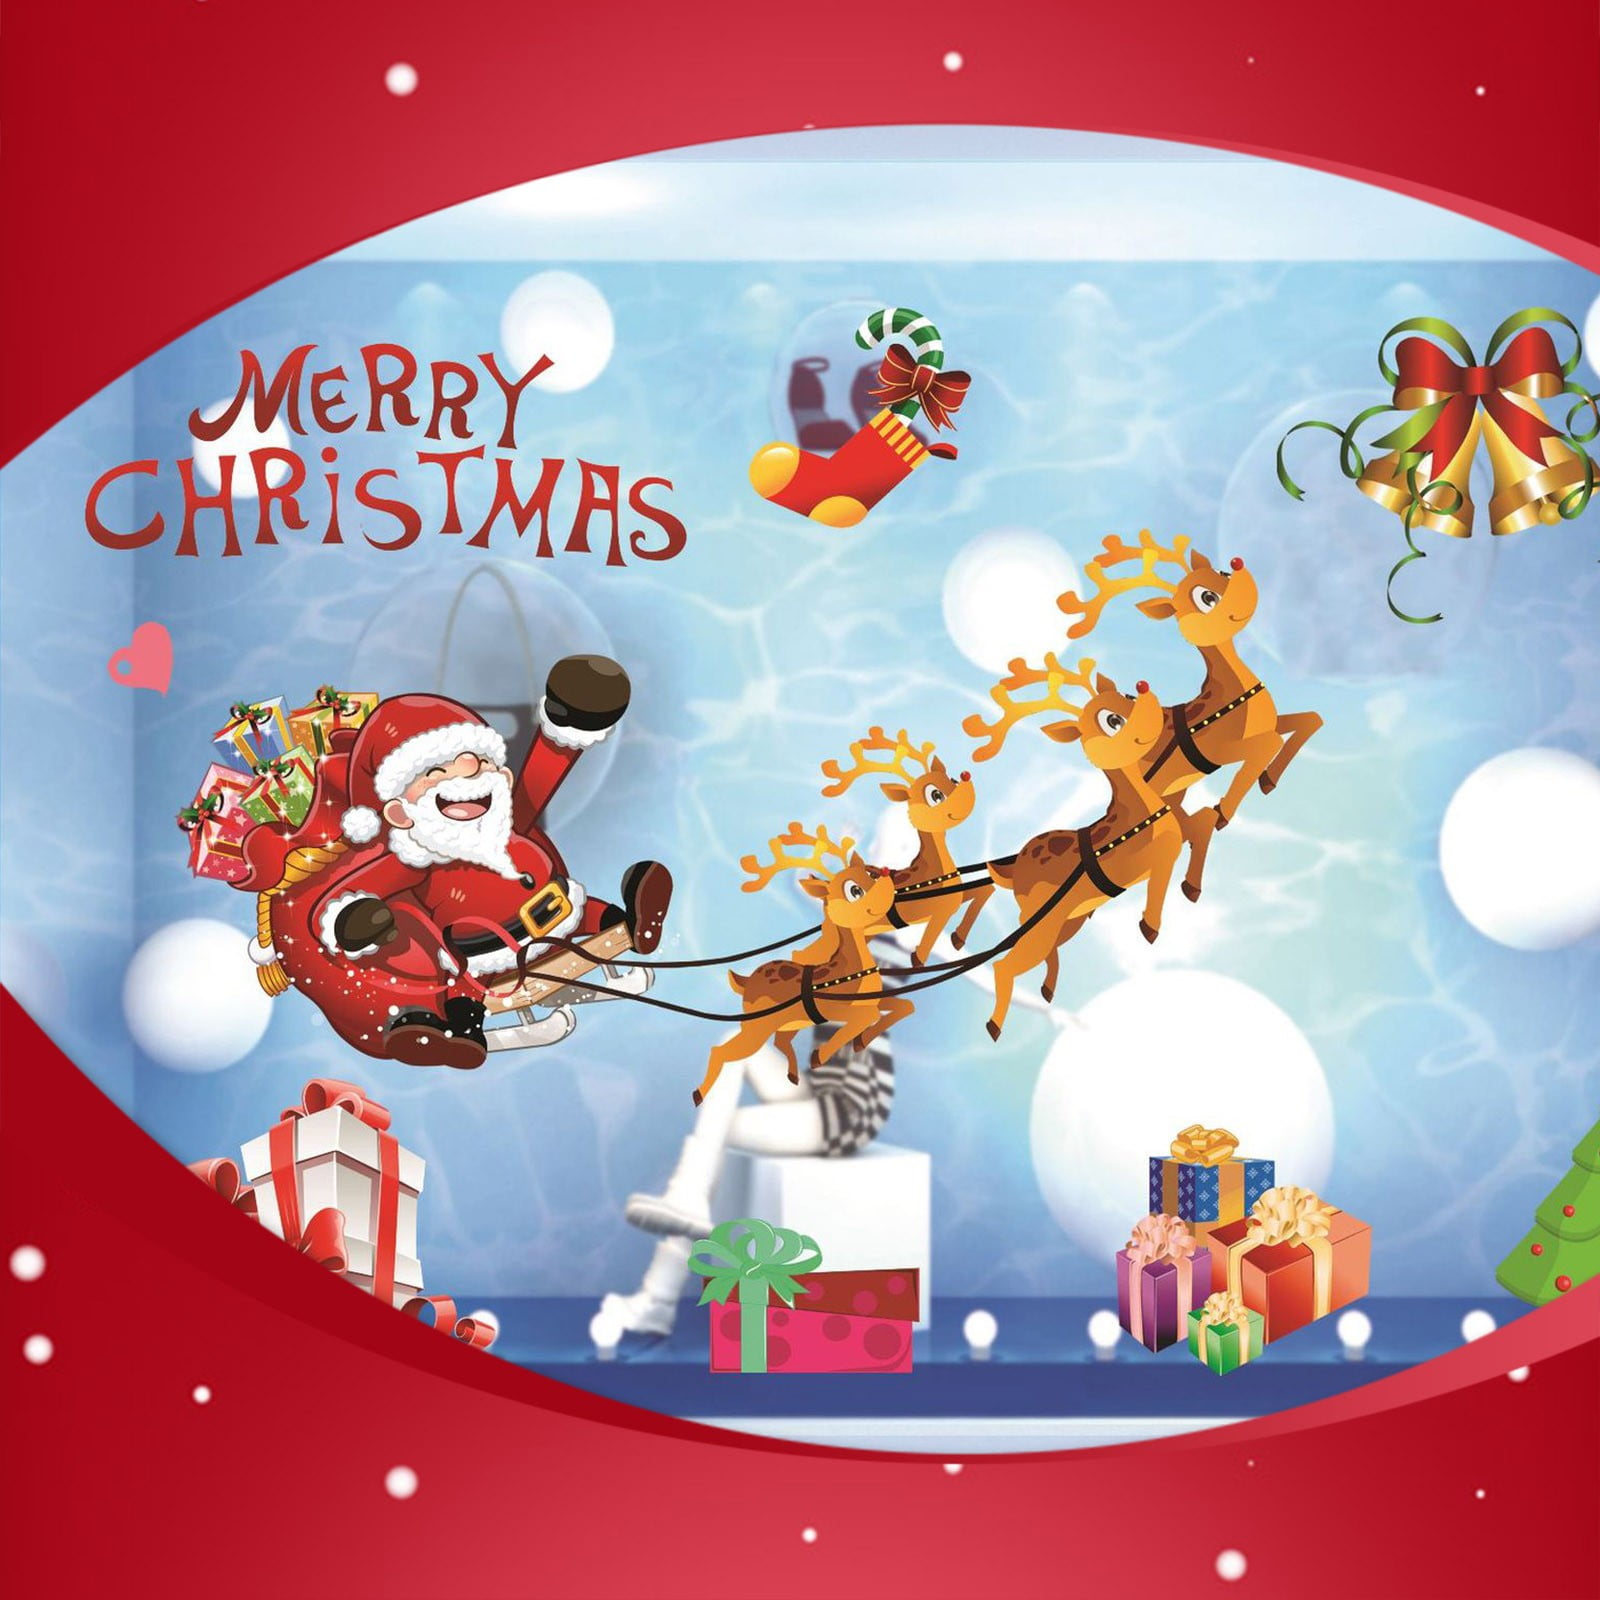 Merry Christmas Wall Art Removable Home Vinyl Window Wall Stickers Decals Decor 